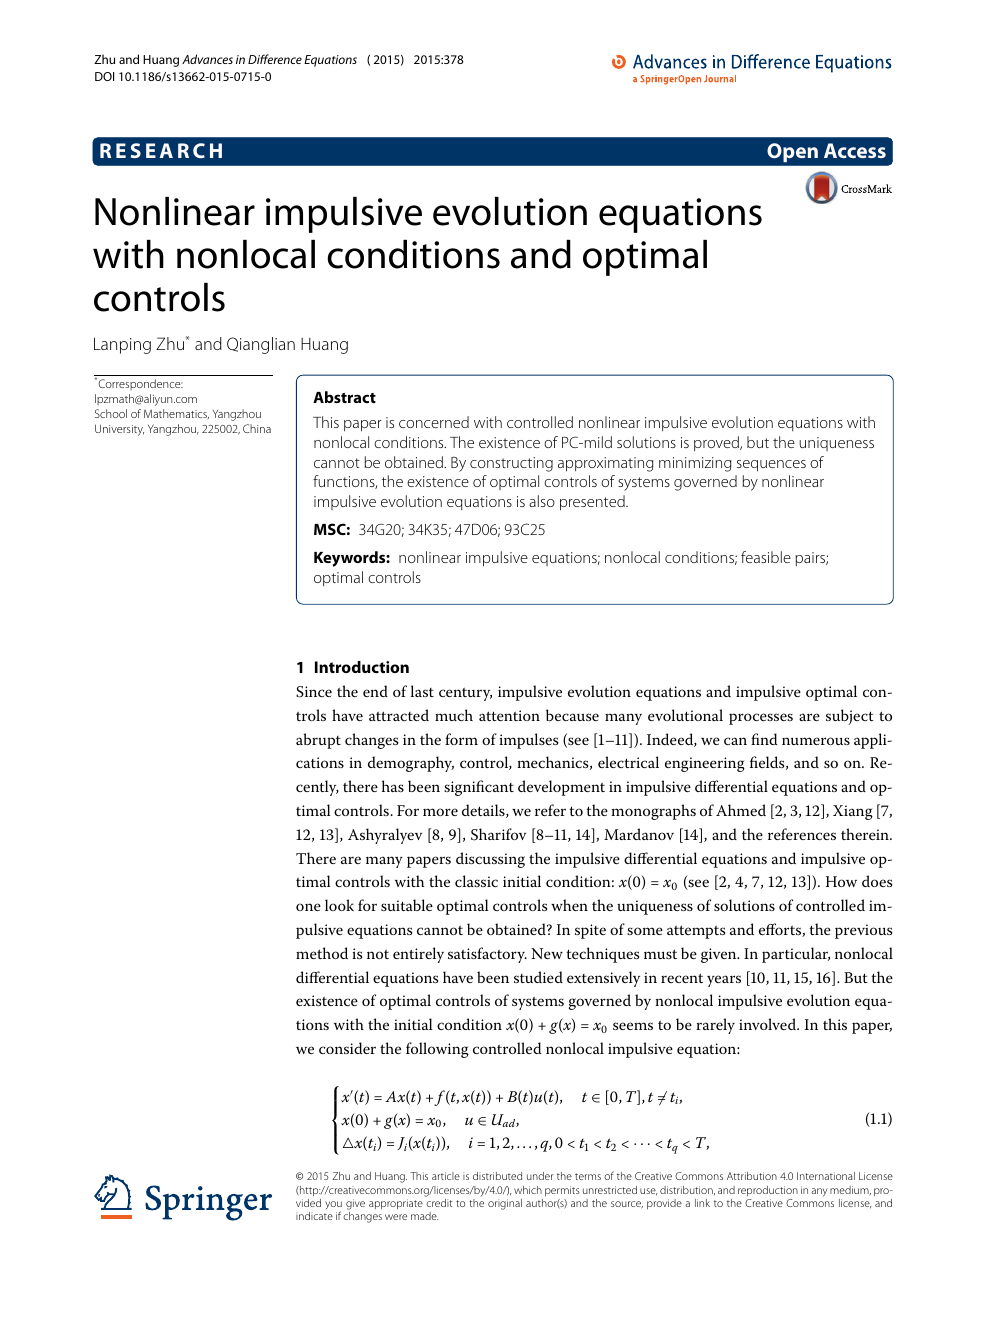 Nonlinear Impulsive Evolution Equations With Nonlocal Conditions And Optimal Controls Topic Of Research Paper In Mathematics Download Scholarly Article Pdf And Read For Free On Cyberleninka Open Science Hub